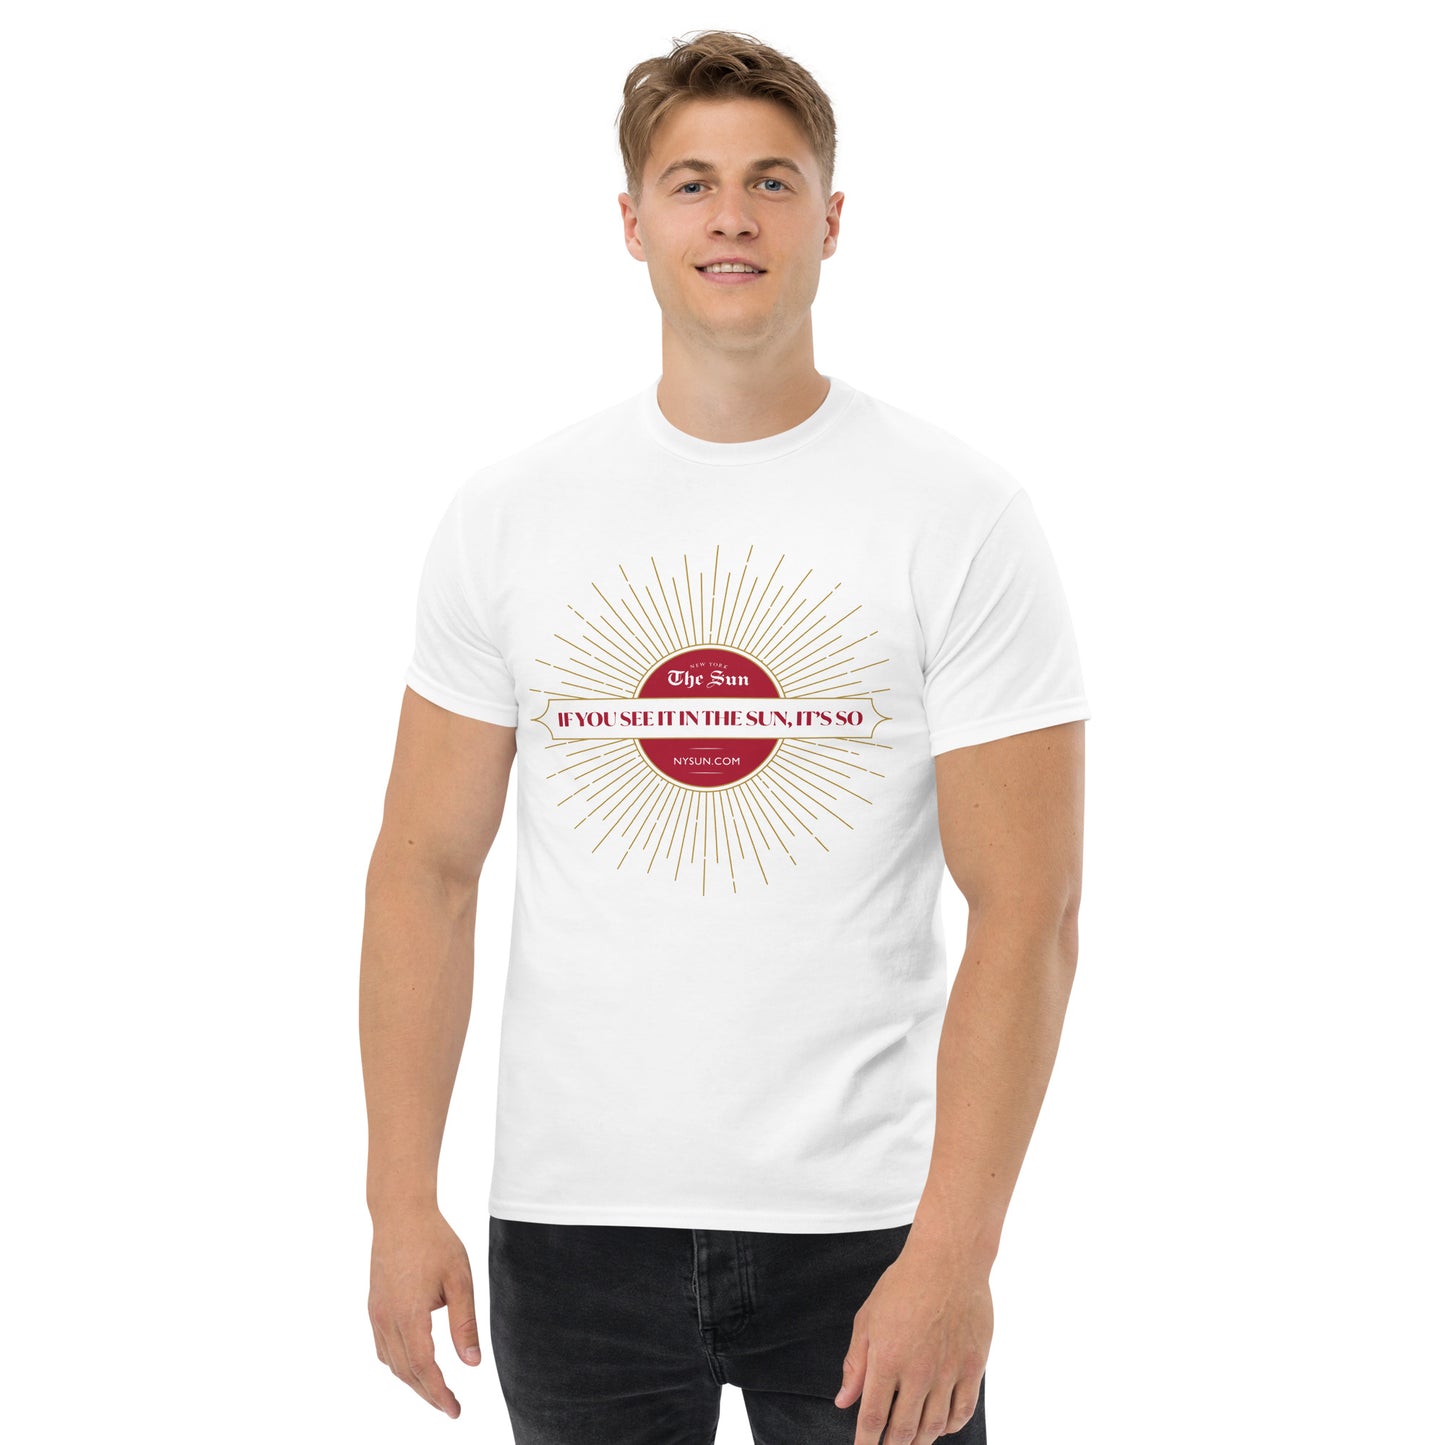 Men's Classic 'If You See It In The Sun' Tee